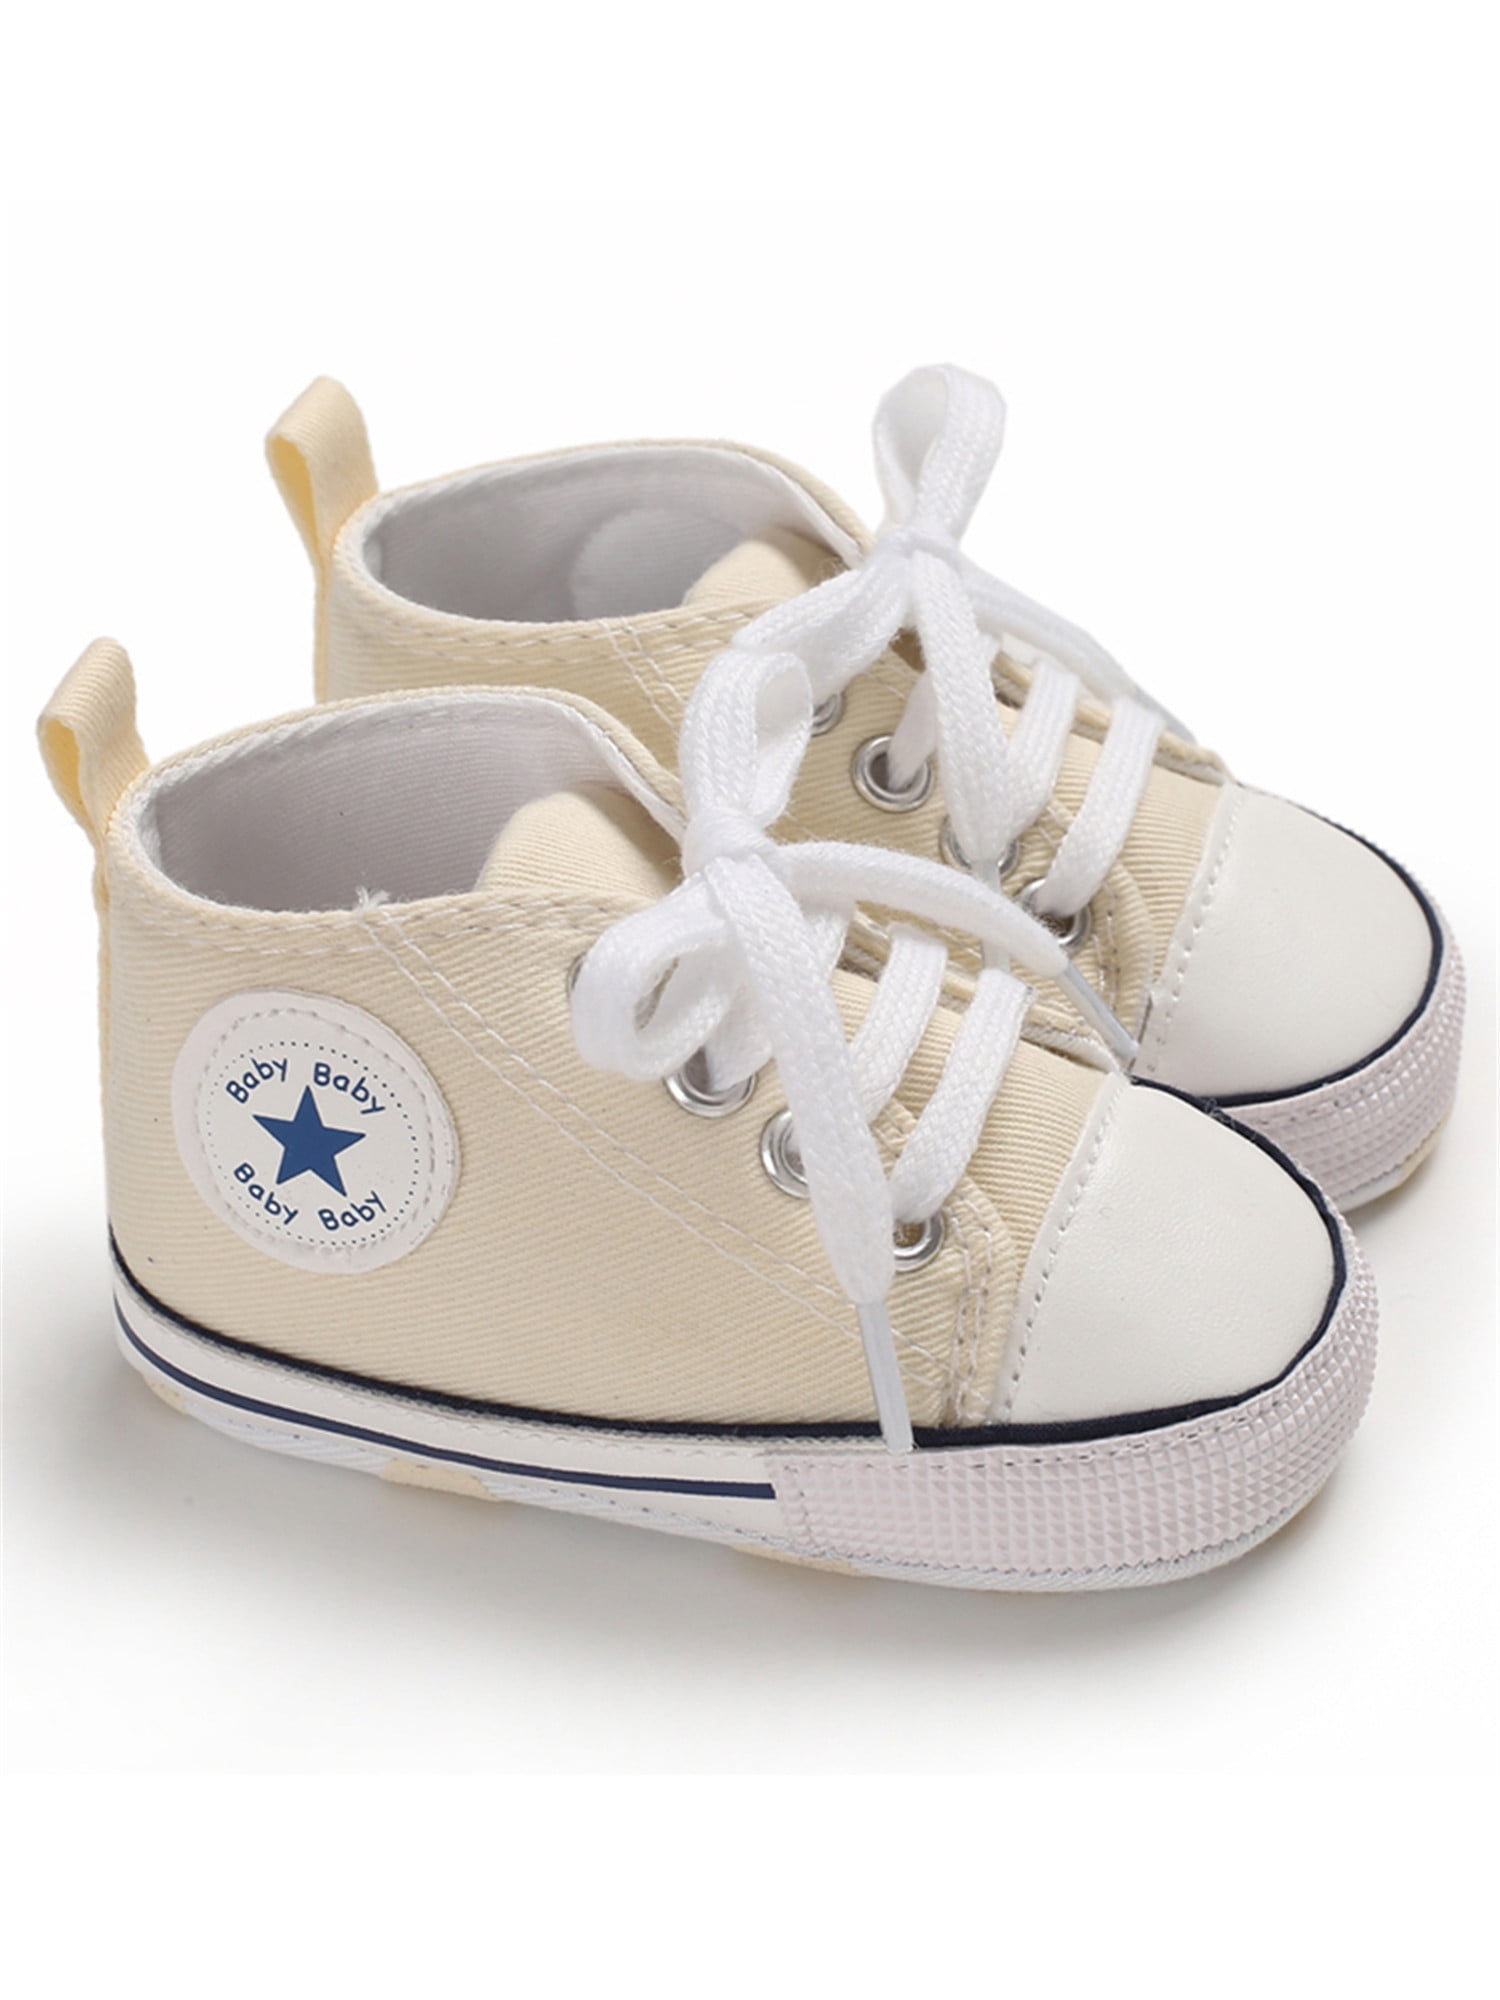 HUHU833 Kids Shoes Toddler Baby Boys Girls Solid Cute Sneaker Canvas Shoes 